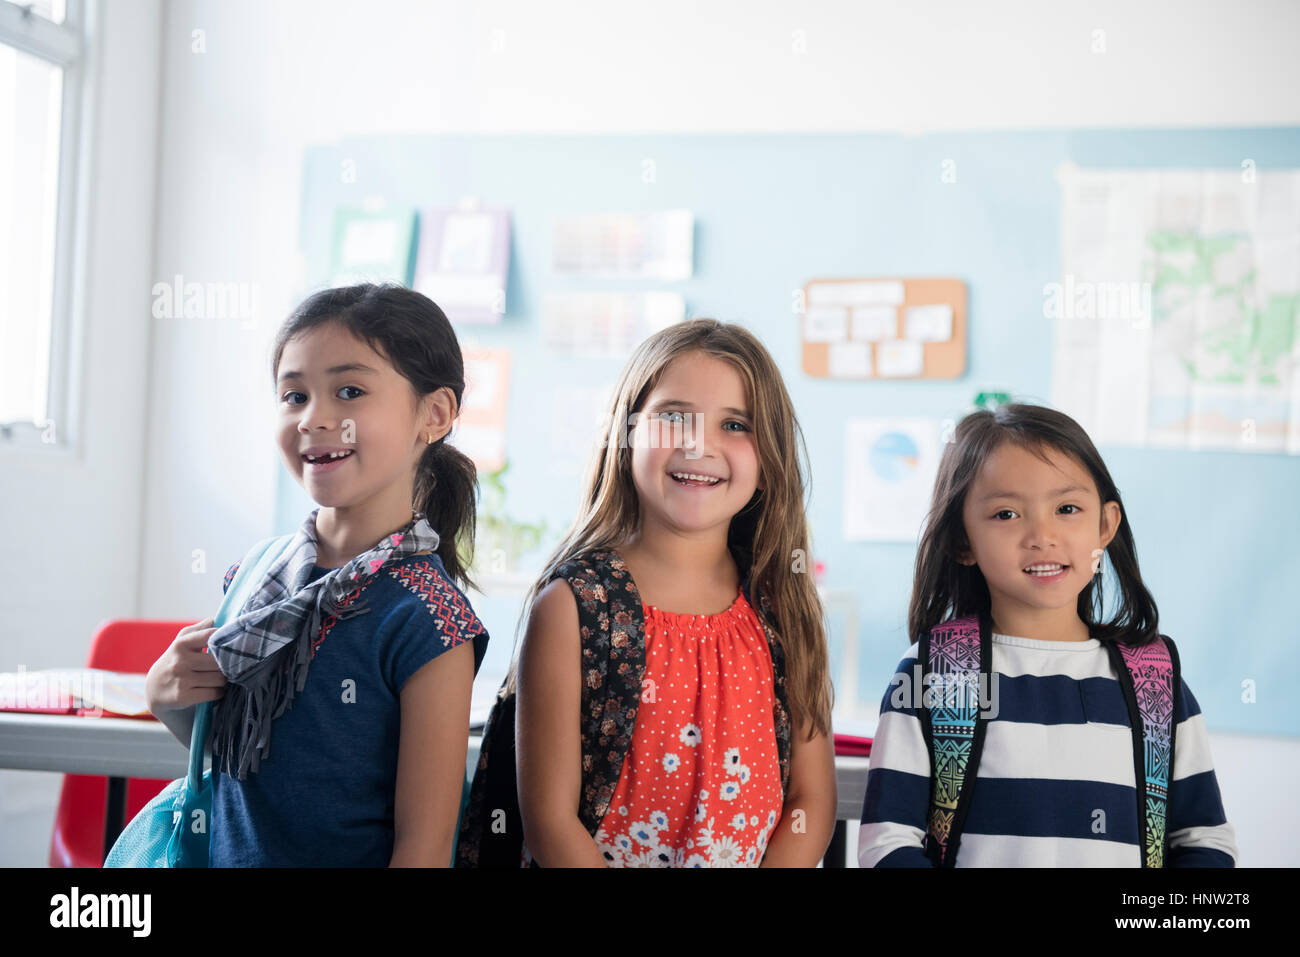 Portrait of girls smiling in classroom Stock Photo